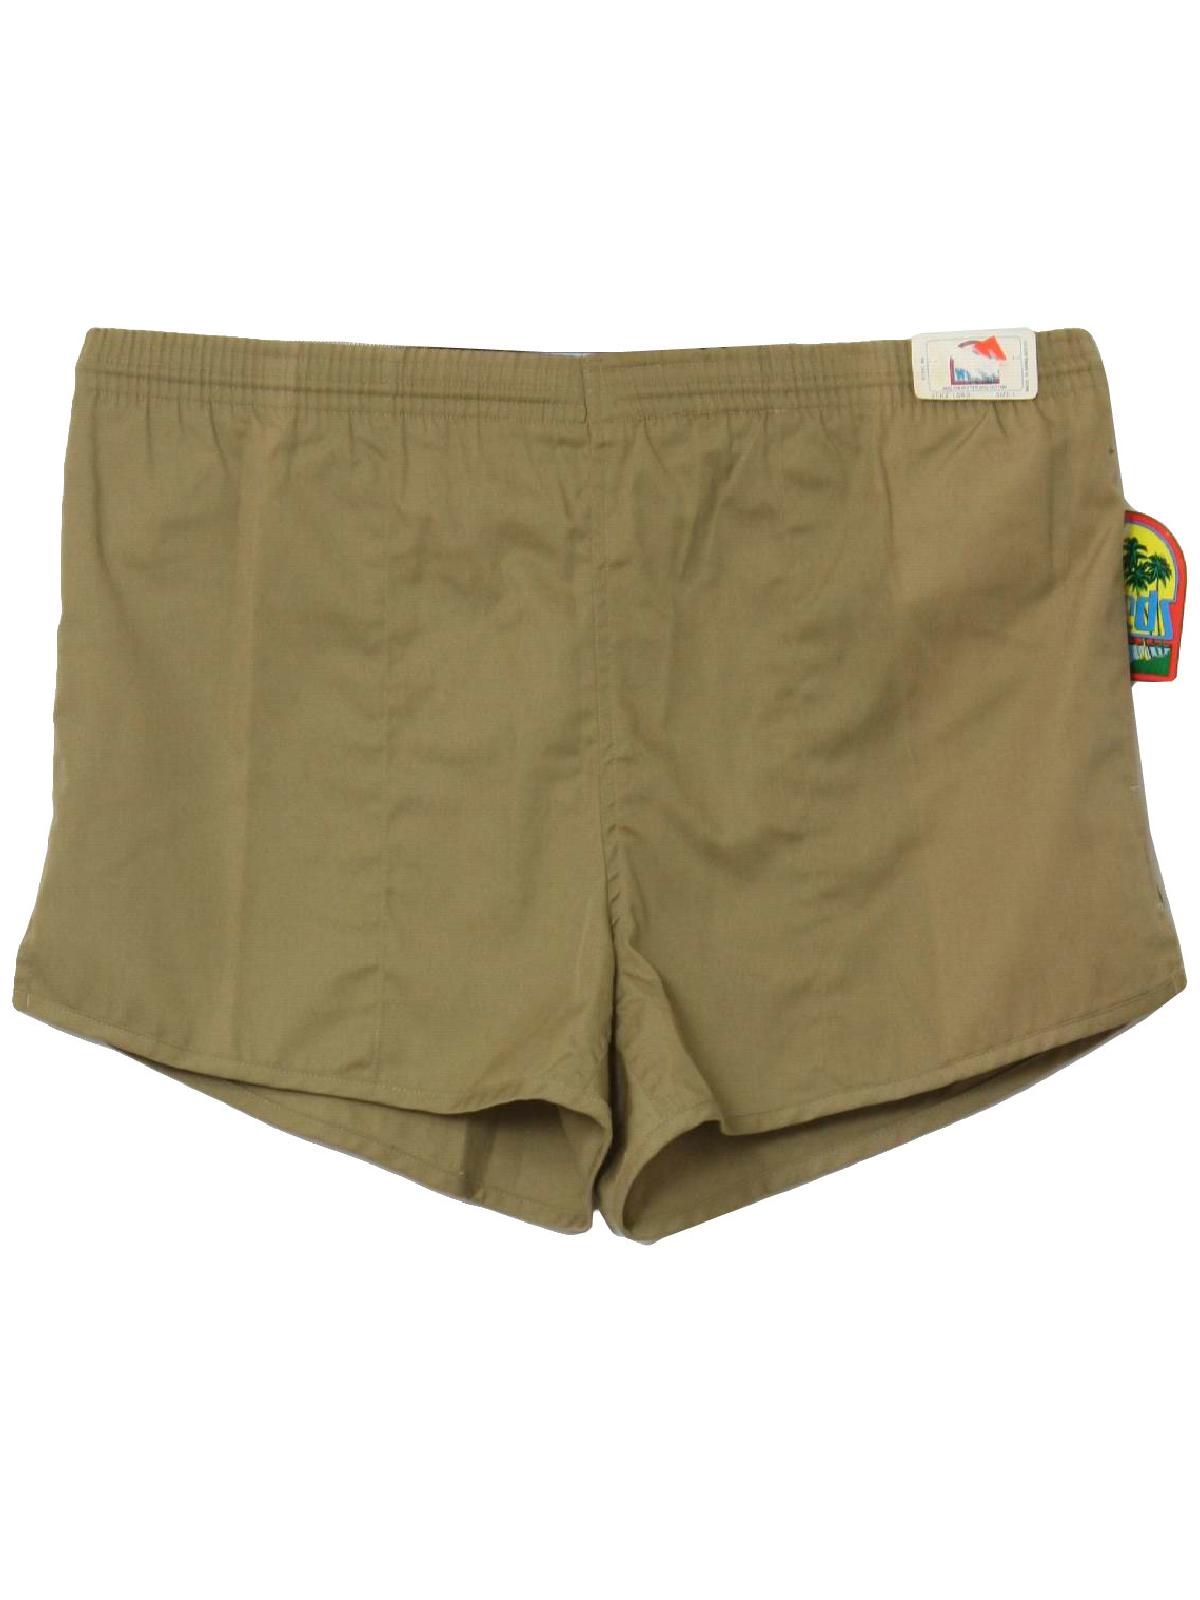 Retro 1970's Shorts (Weeds) : 70s -Weeds- Mens khaki tan polyester and ...